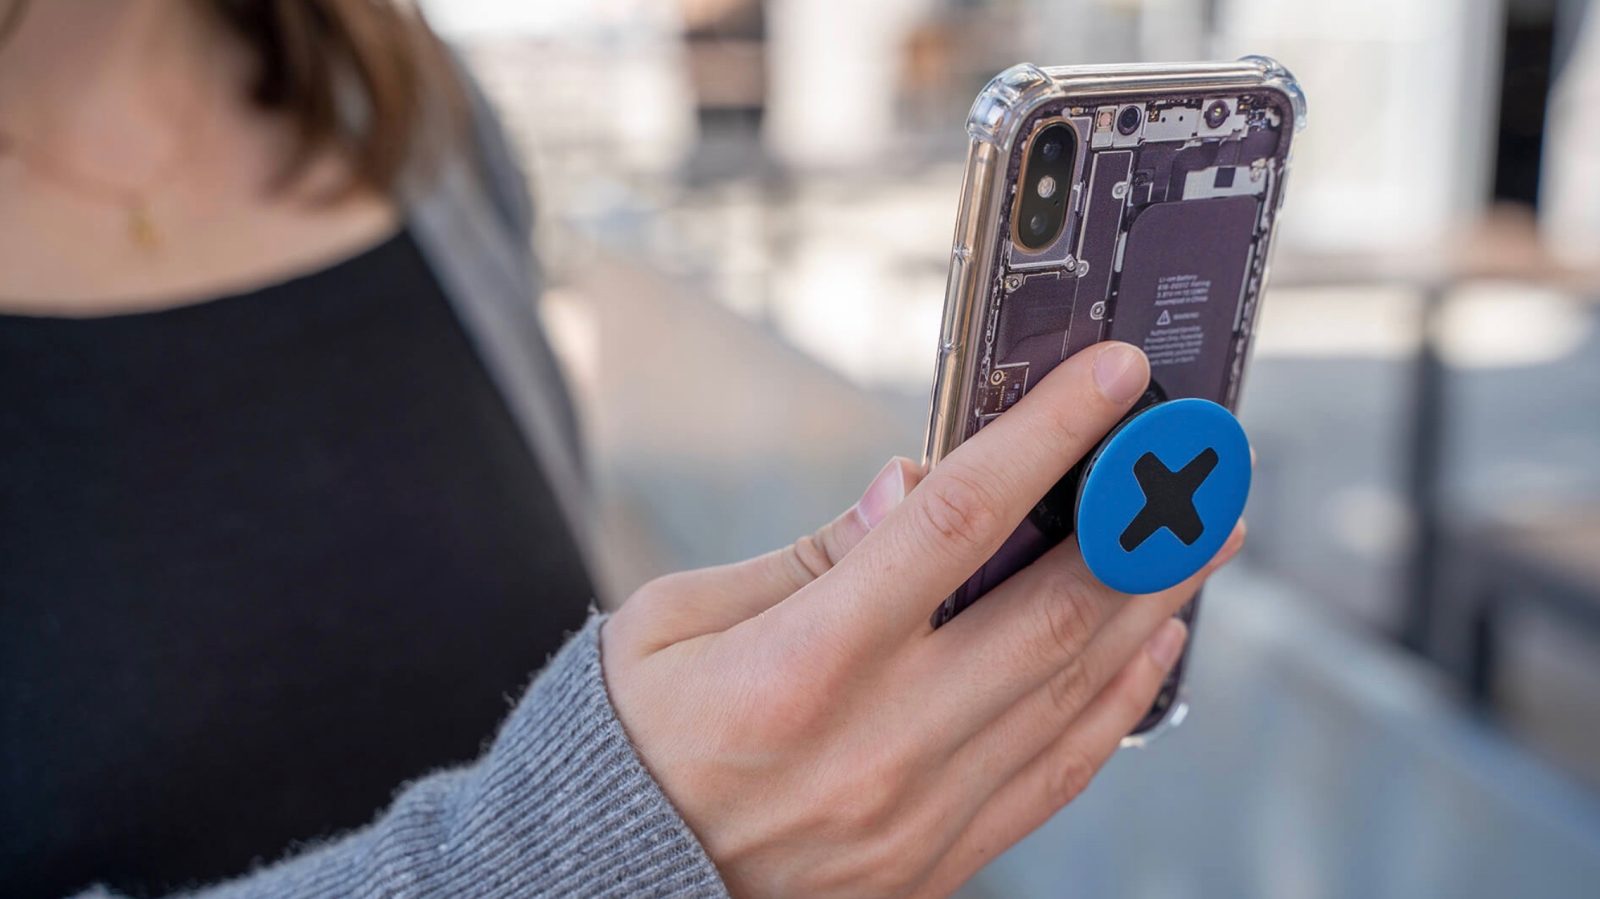 iFixit takes you inside your iPhone with new 'Insight' cases.